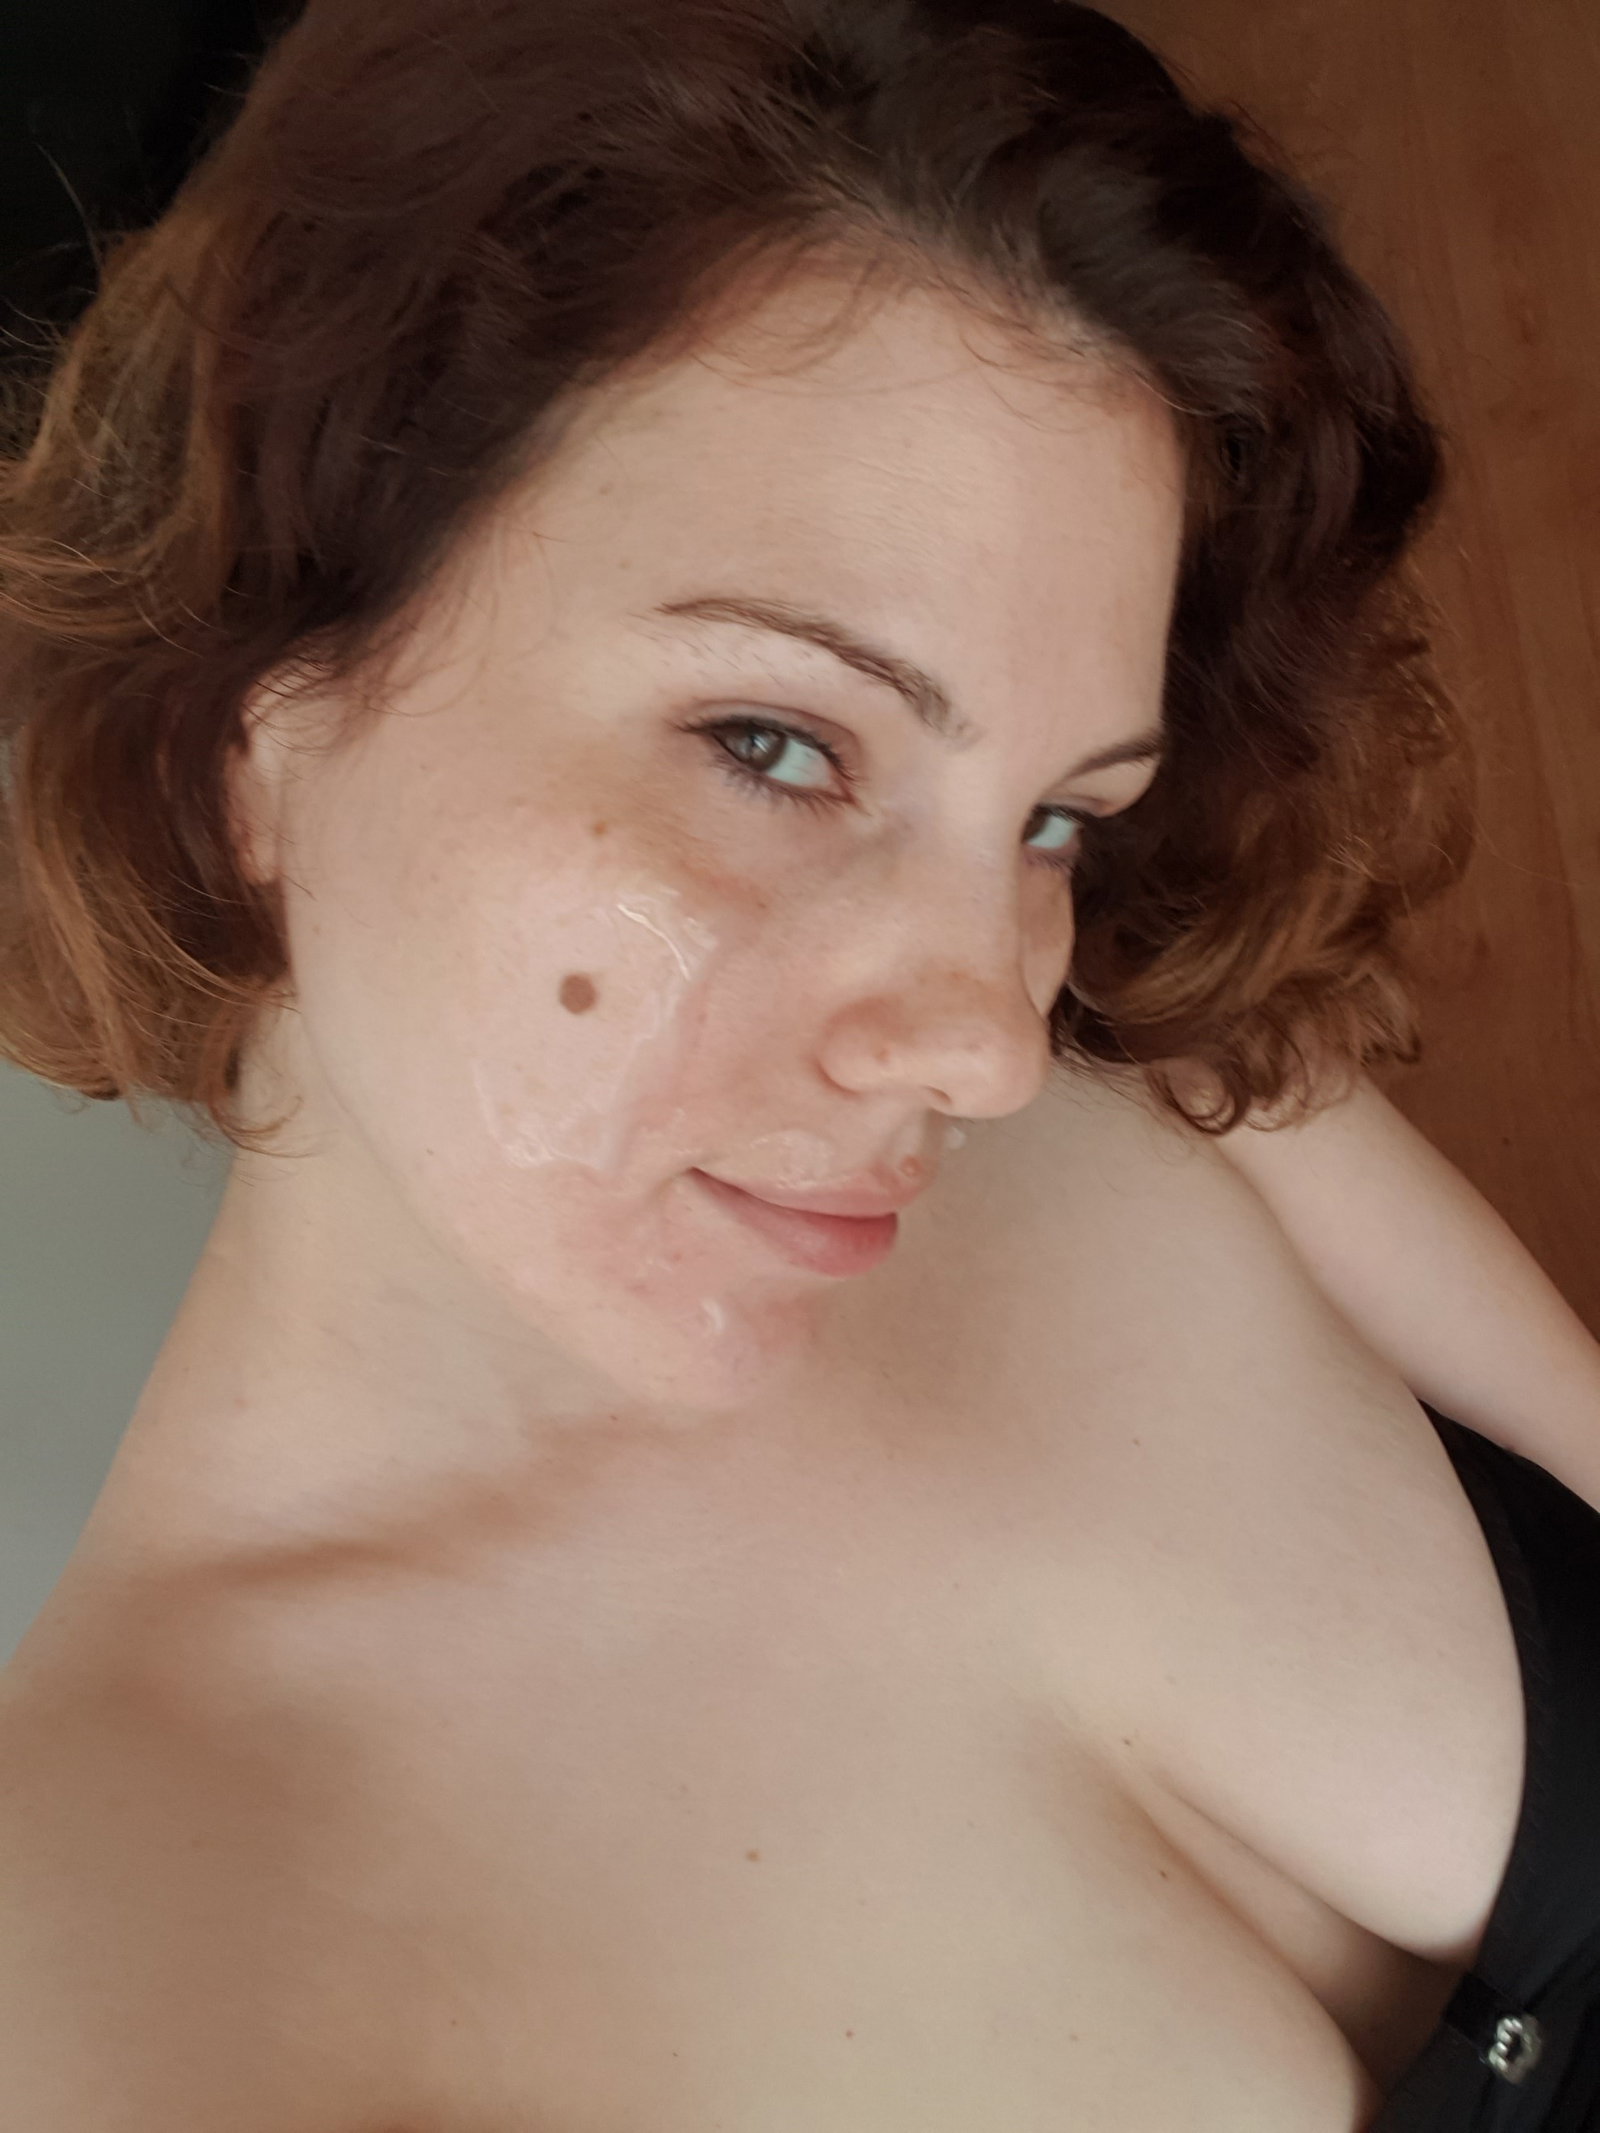 Watch the Photo by KarlaRose with the username @KarlaRose, who is a star user, posted on October 2, 2019. The post is about the topic Cum Sluts.